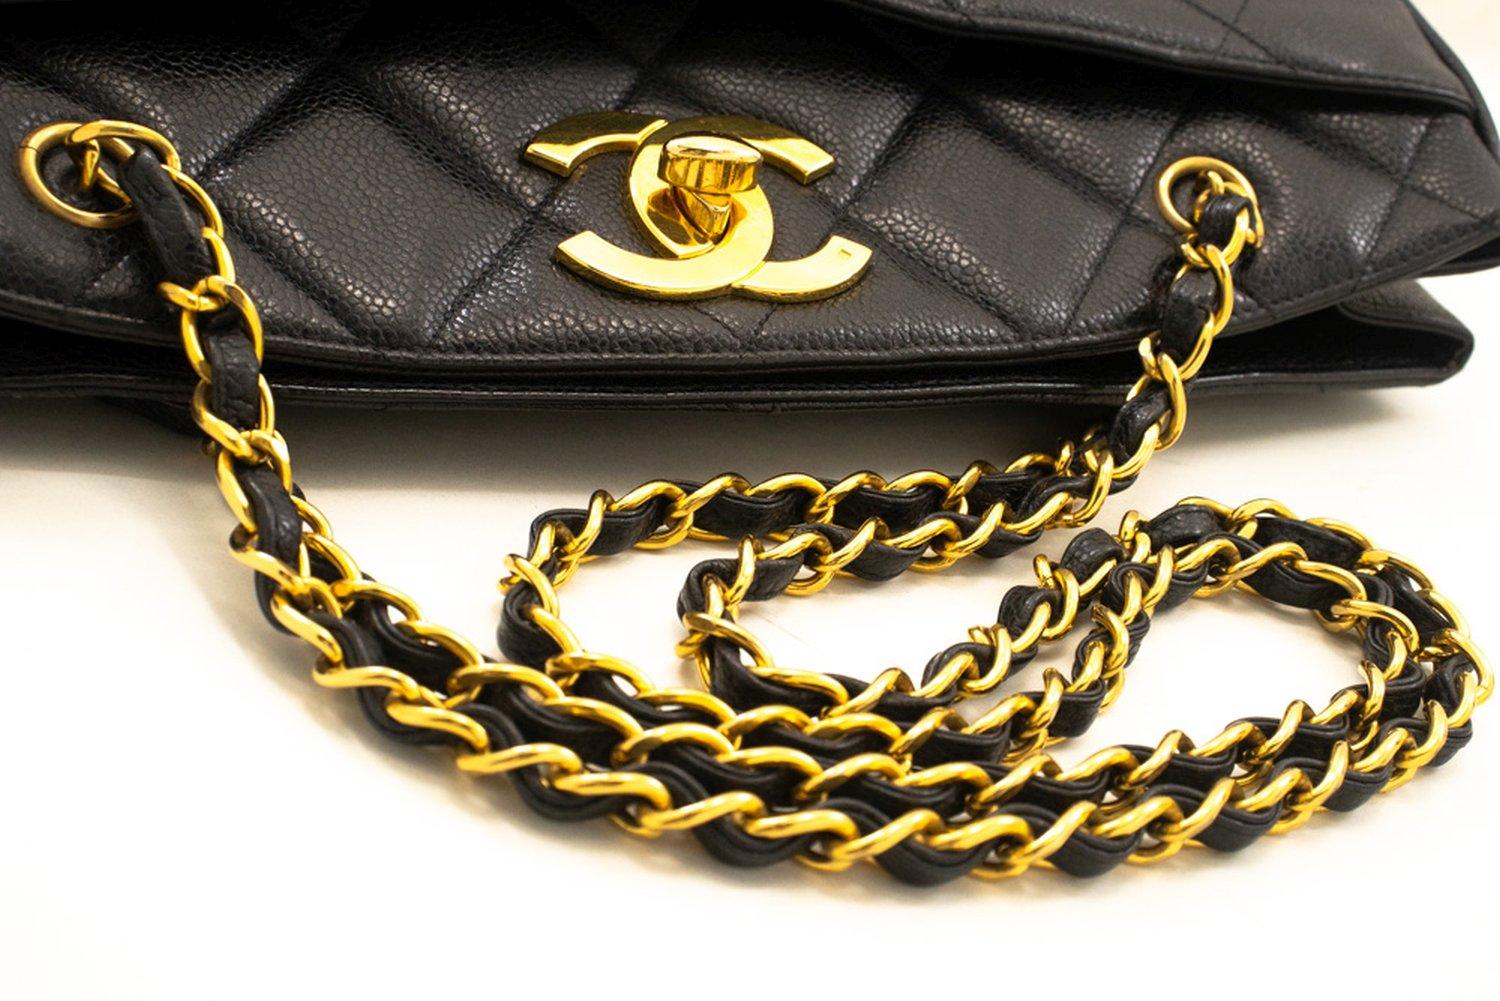 CHANEL Caviar Large Chain Shoulder Bag Black Quilted Leather For Sale 9